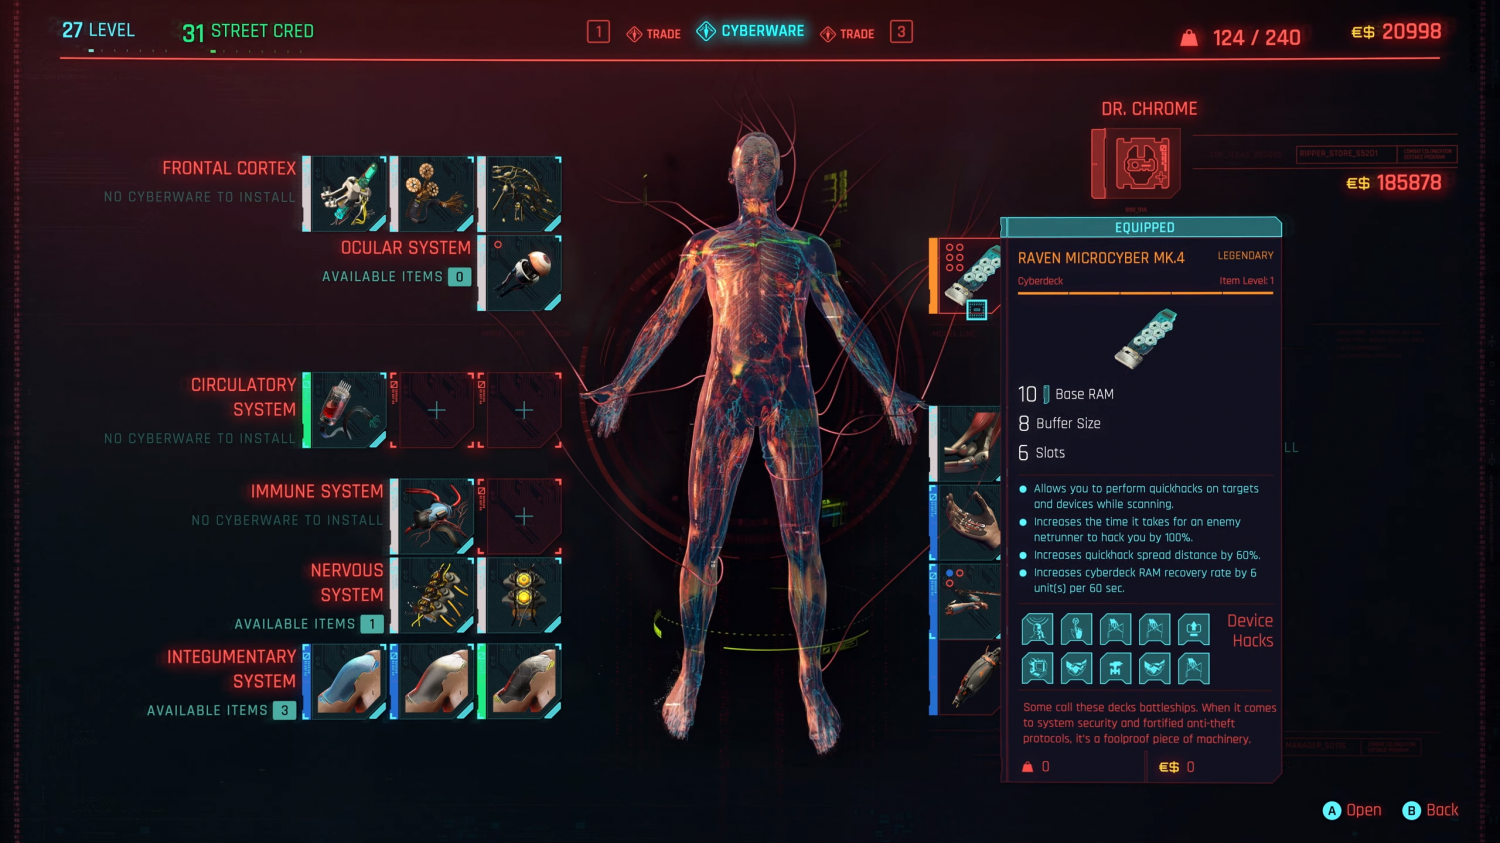 76322_566_cyberpunk-2077-final-skill-trees-and-character-stats-revealed_full.png